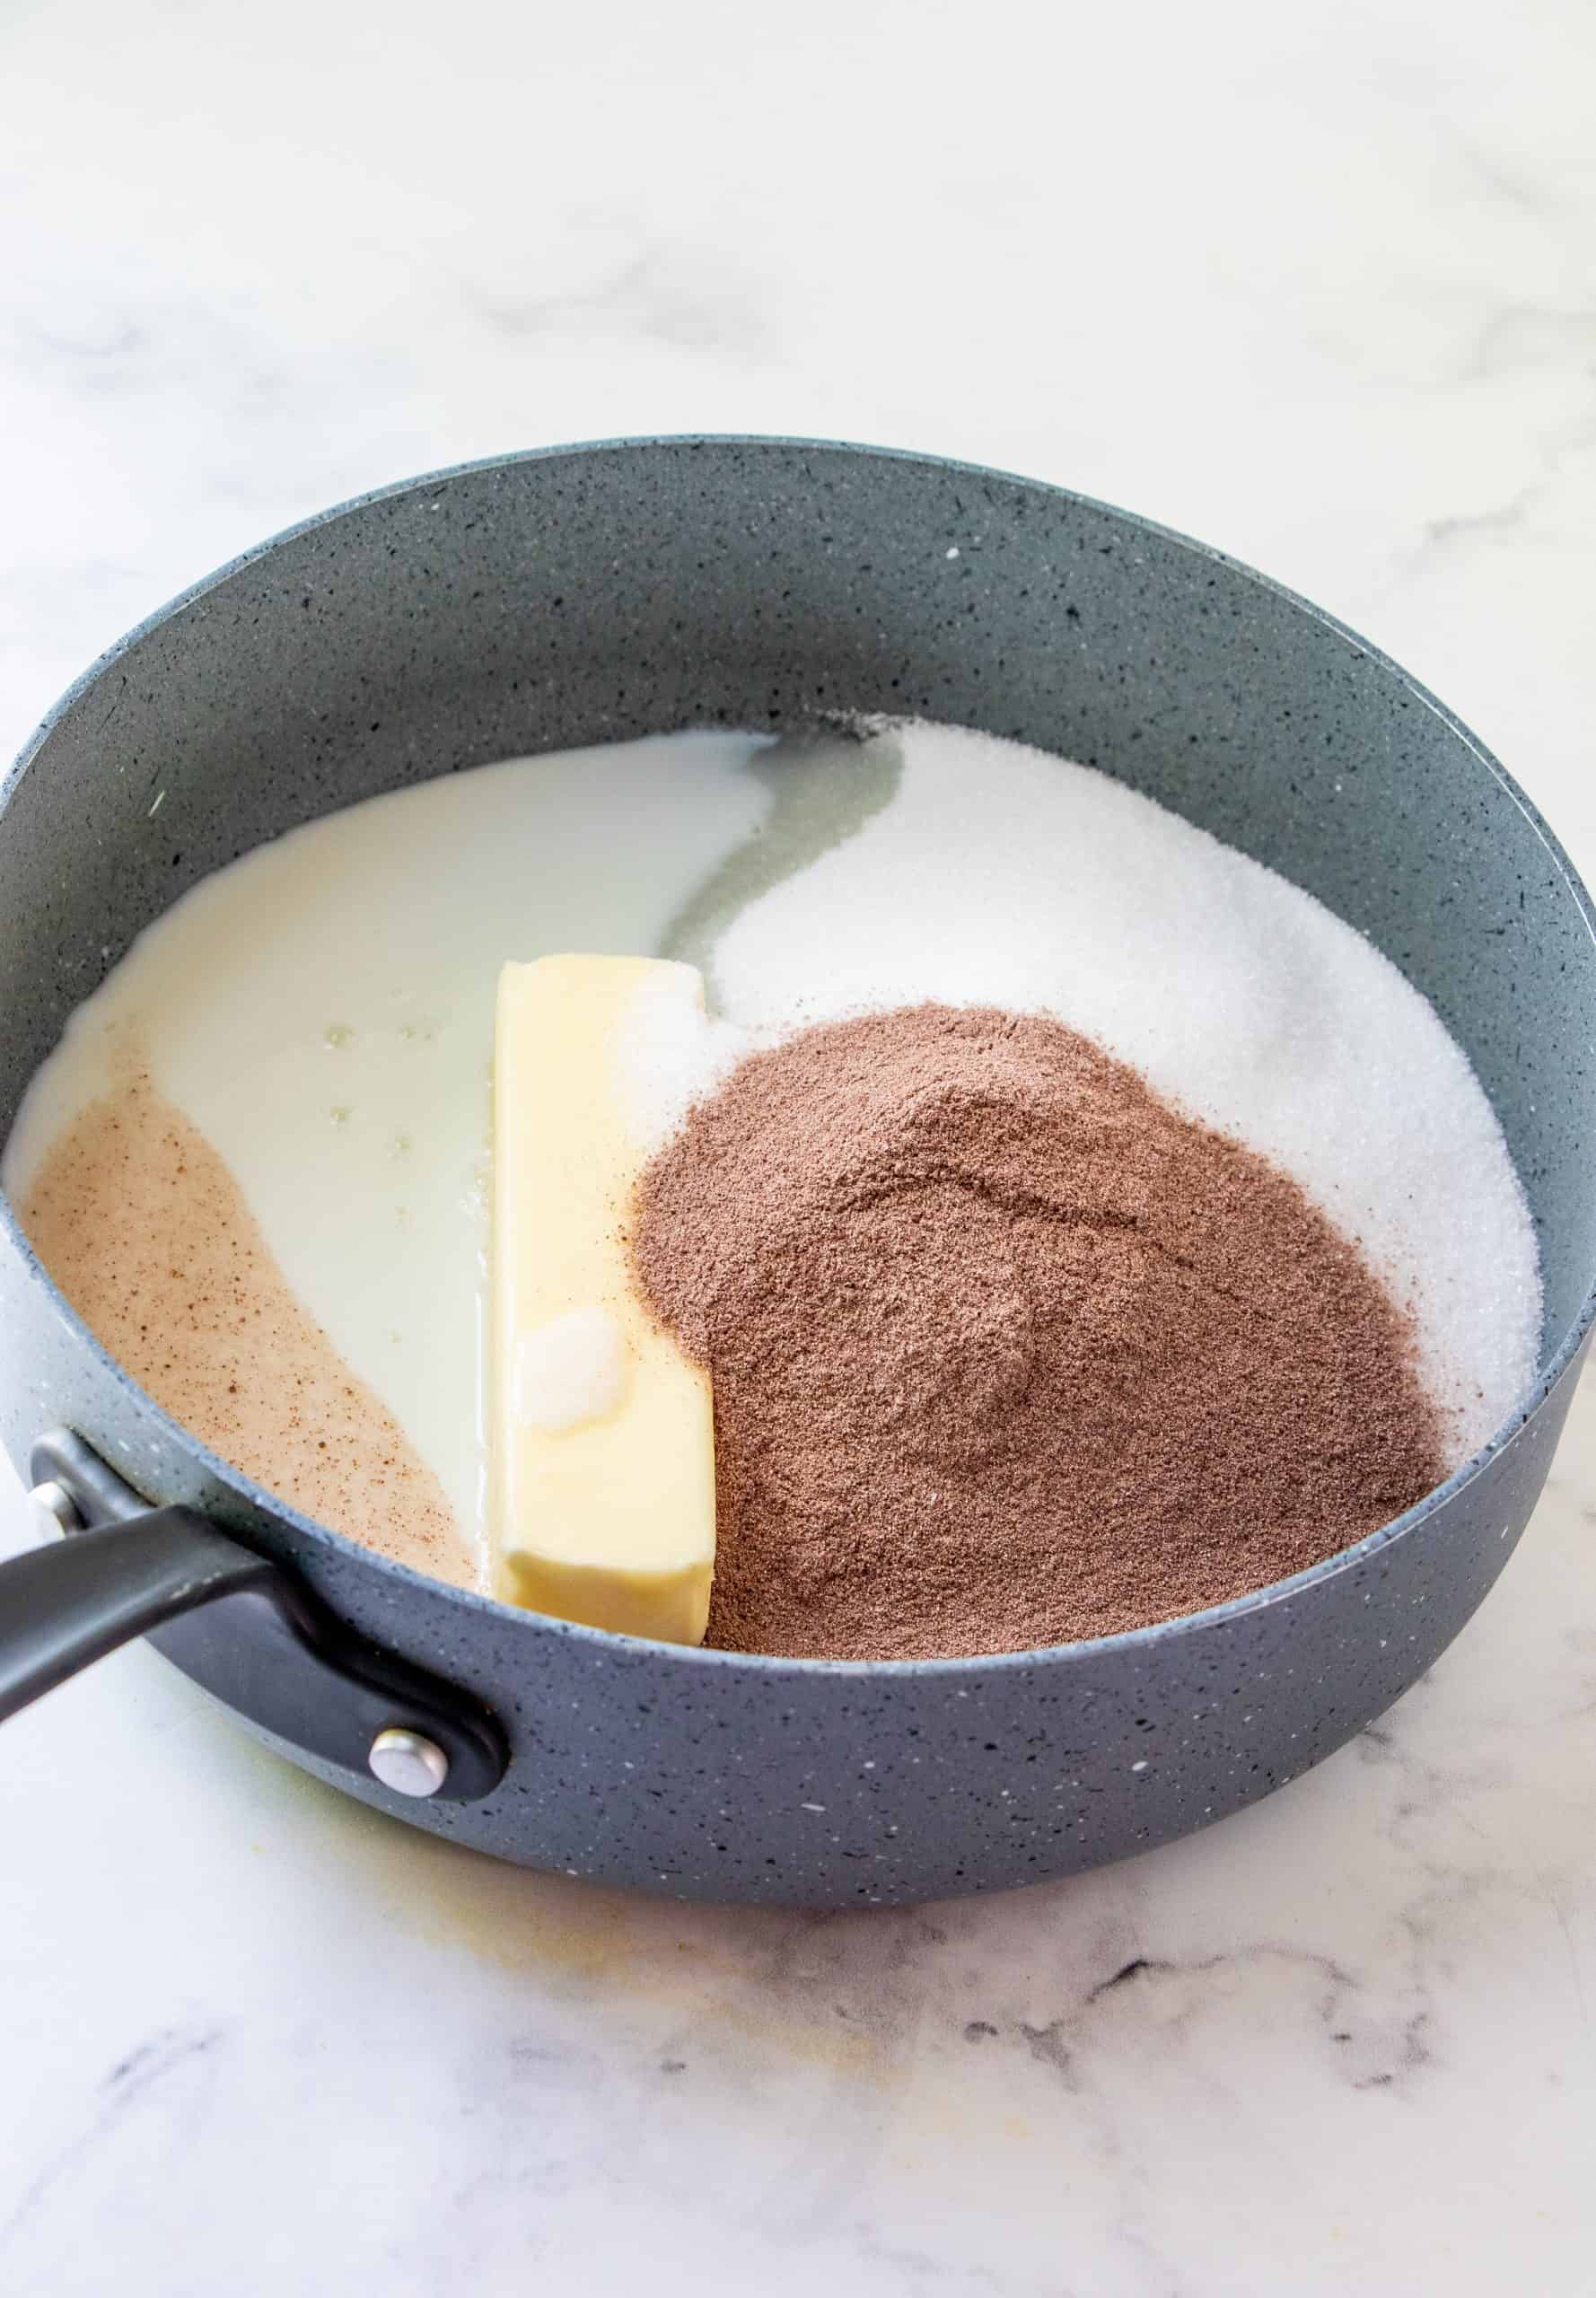 a stick of butter, sugar, milk and hot chocolate powder mix in a large pan.